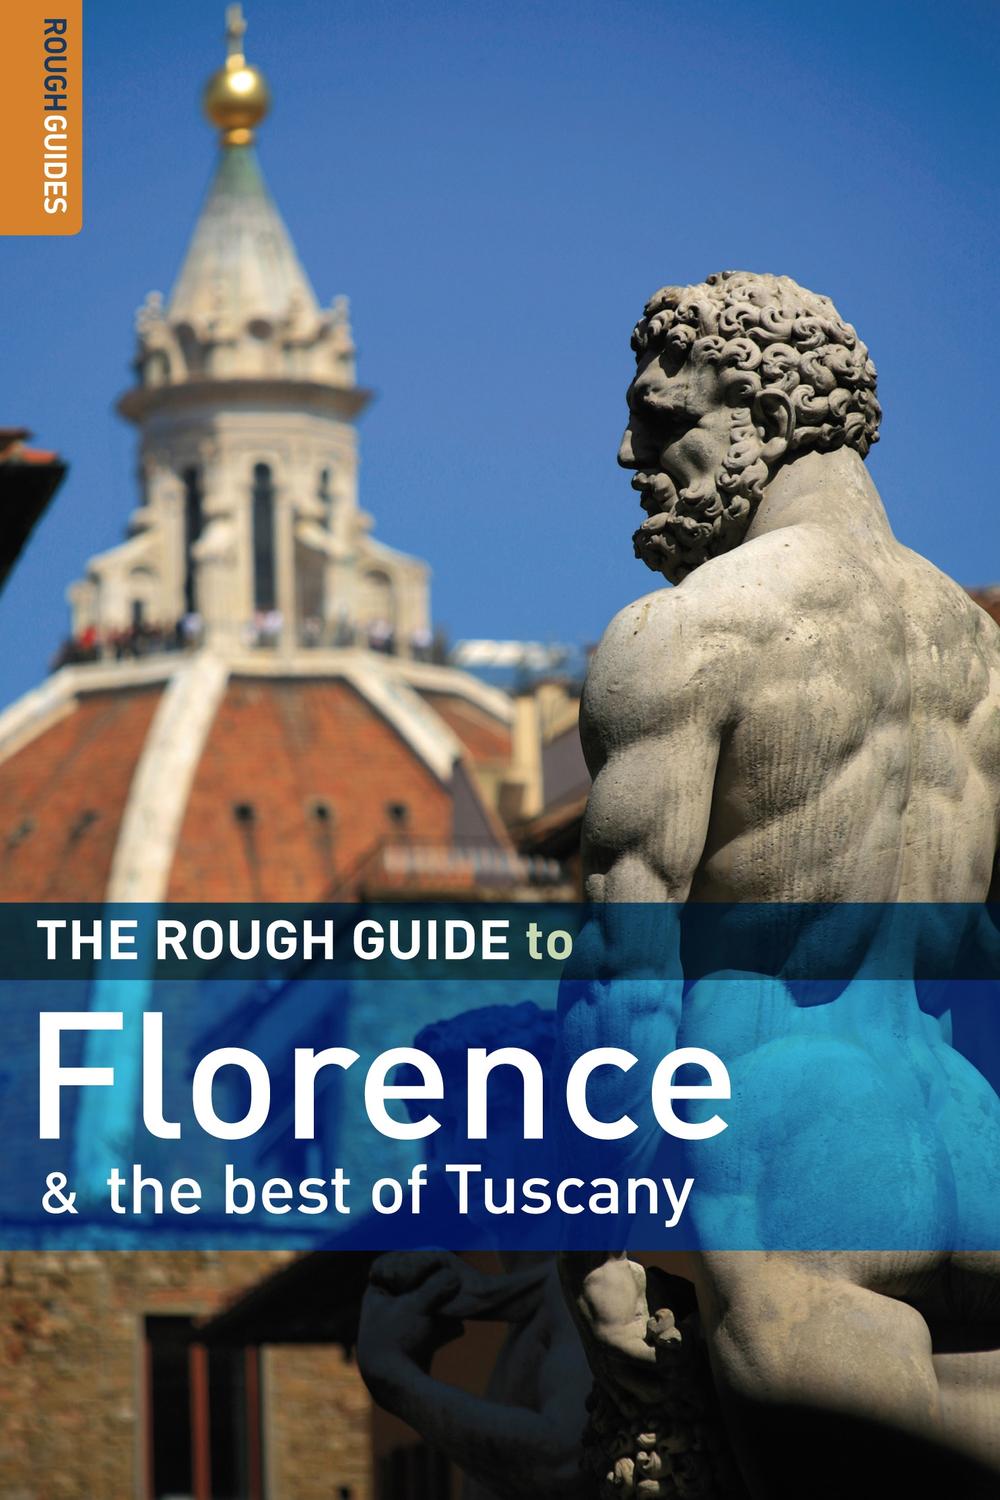 The Rough Guide to Florence & the best of Tuscany